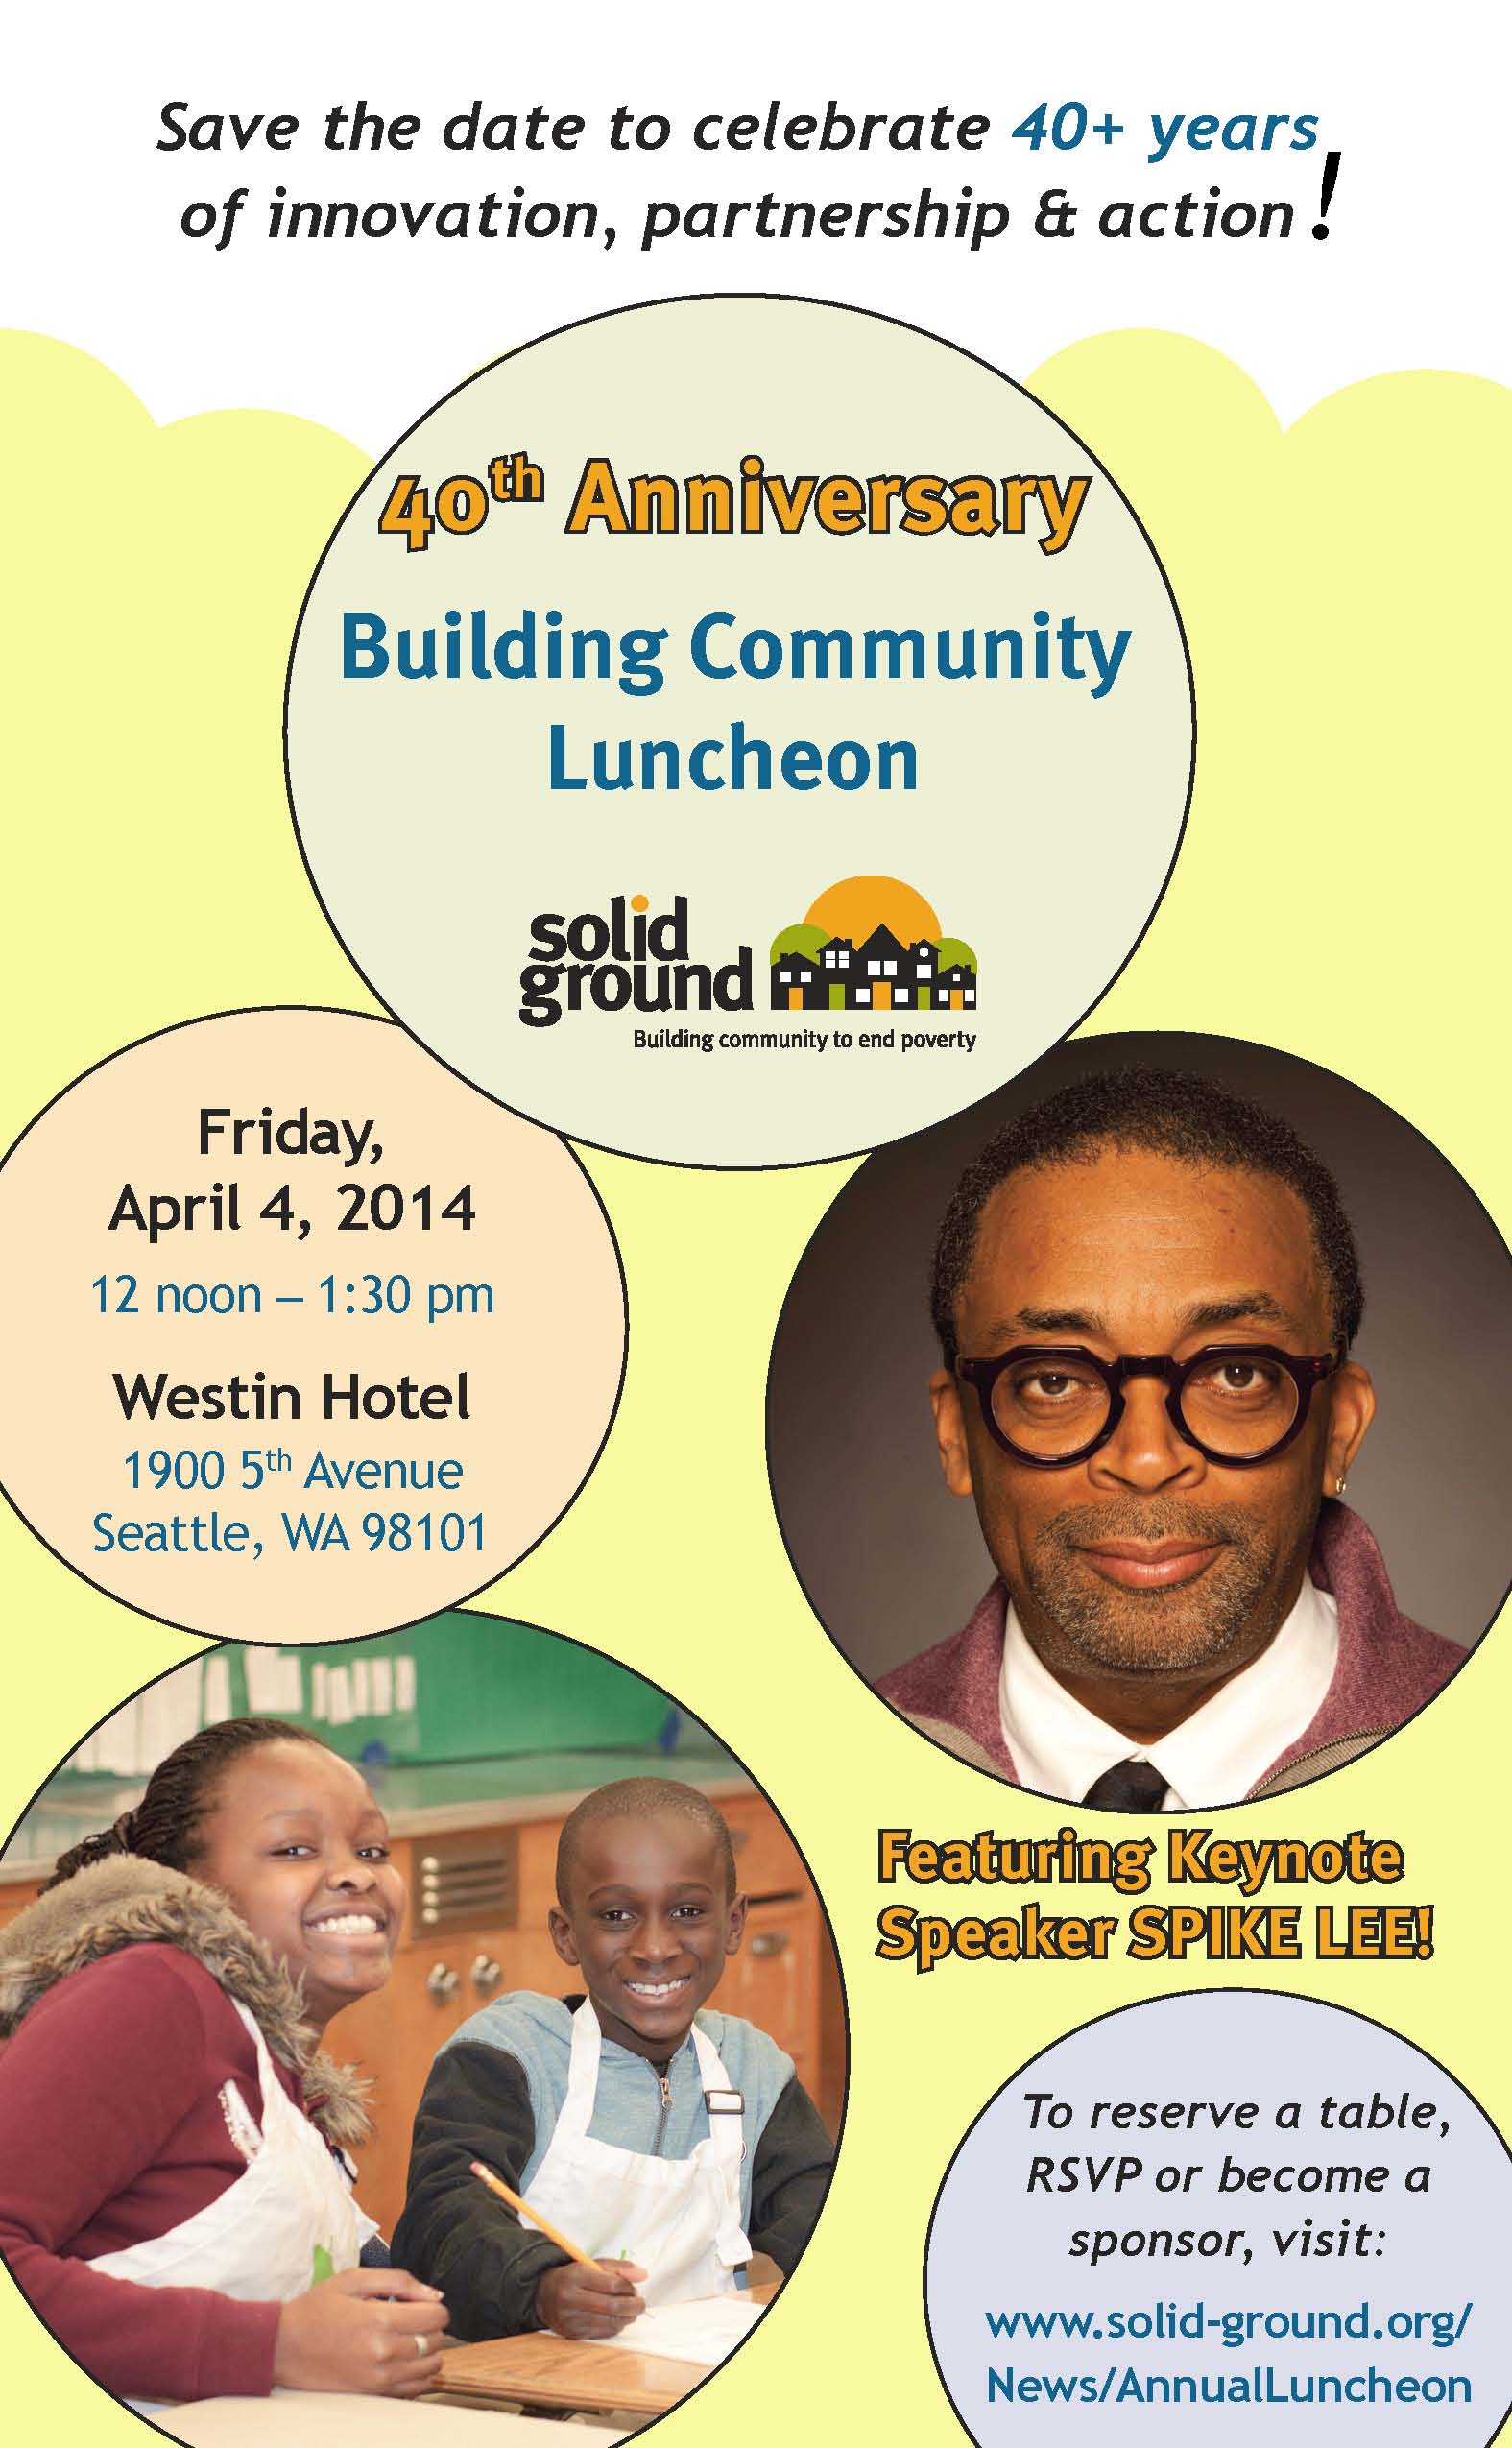 Save the Date for Solid Ground's Building Community Luncheon, 4/4/14